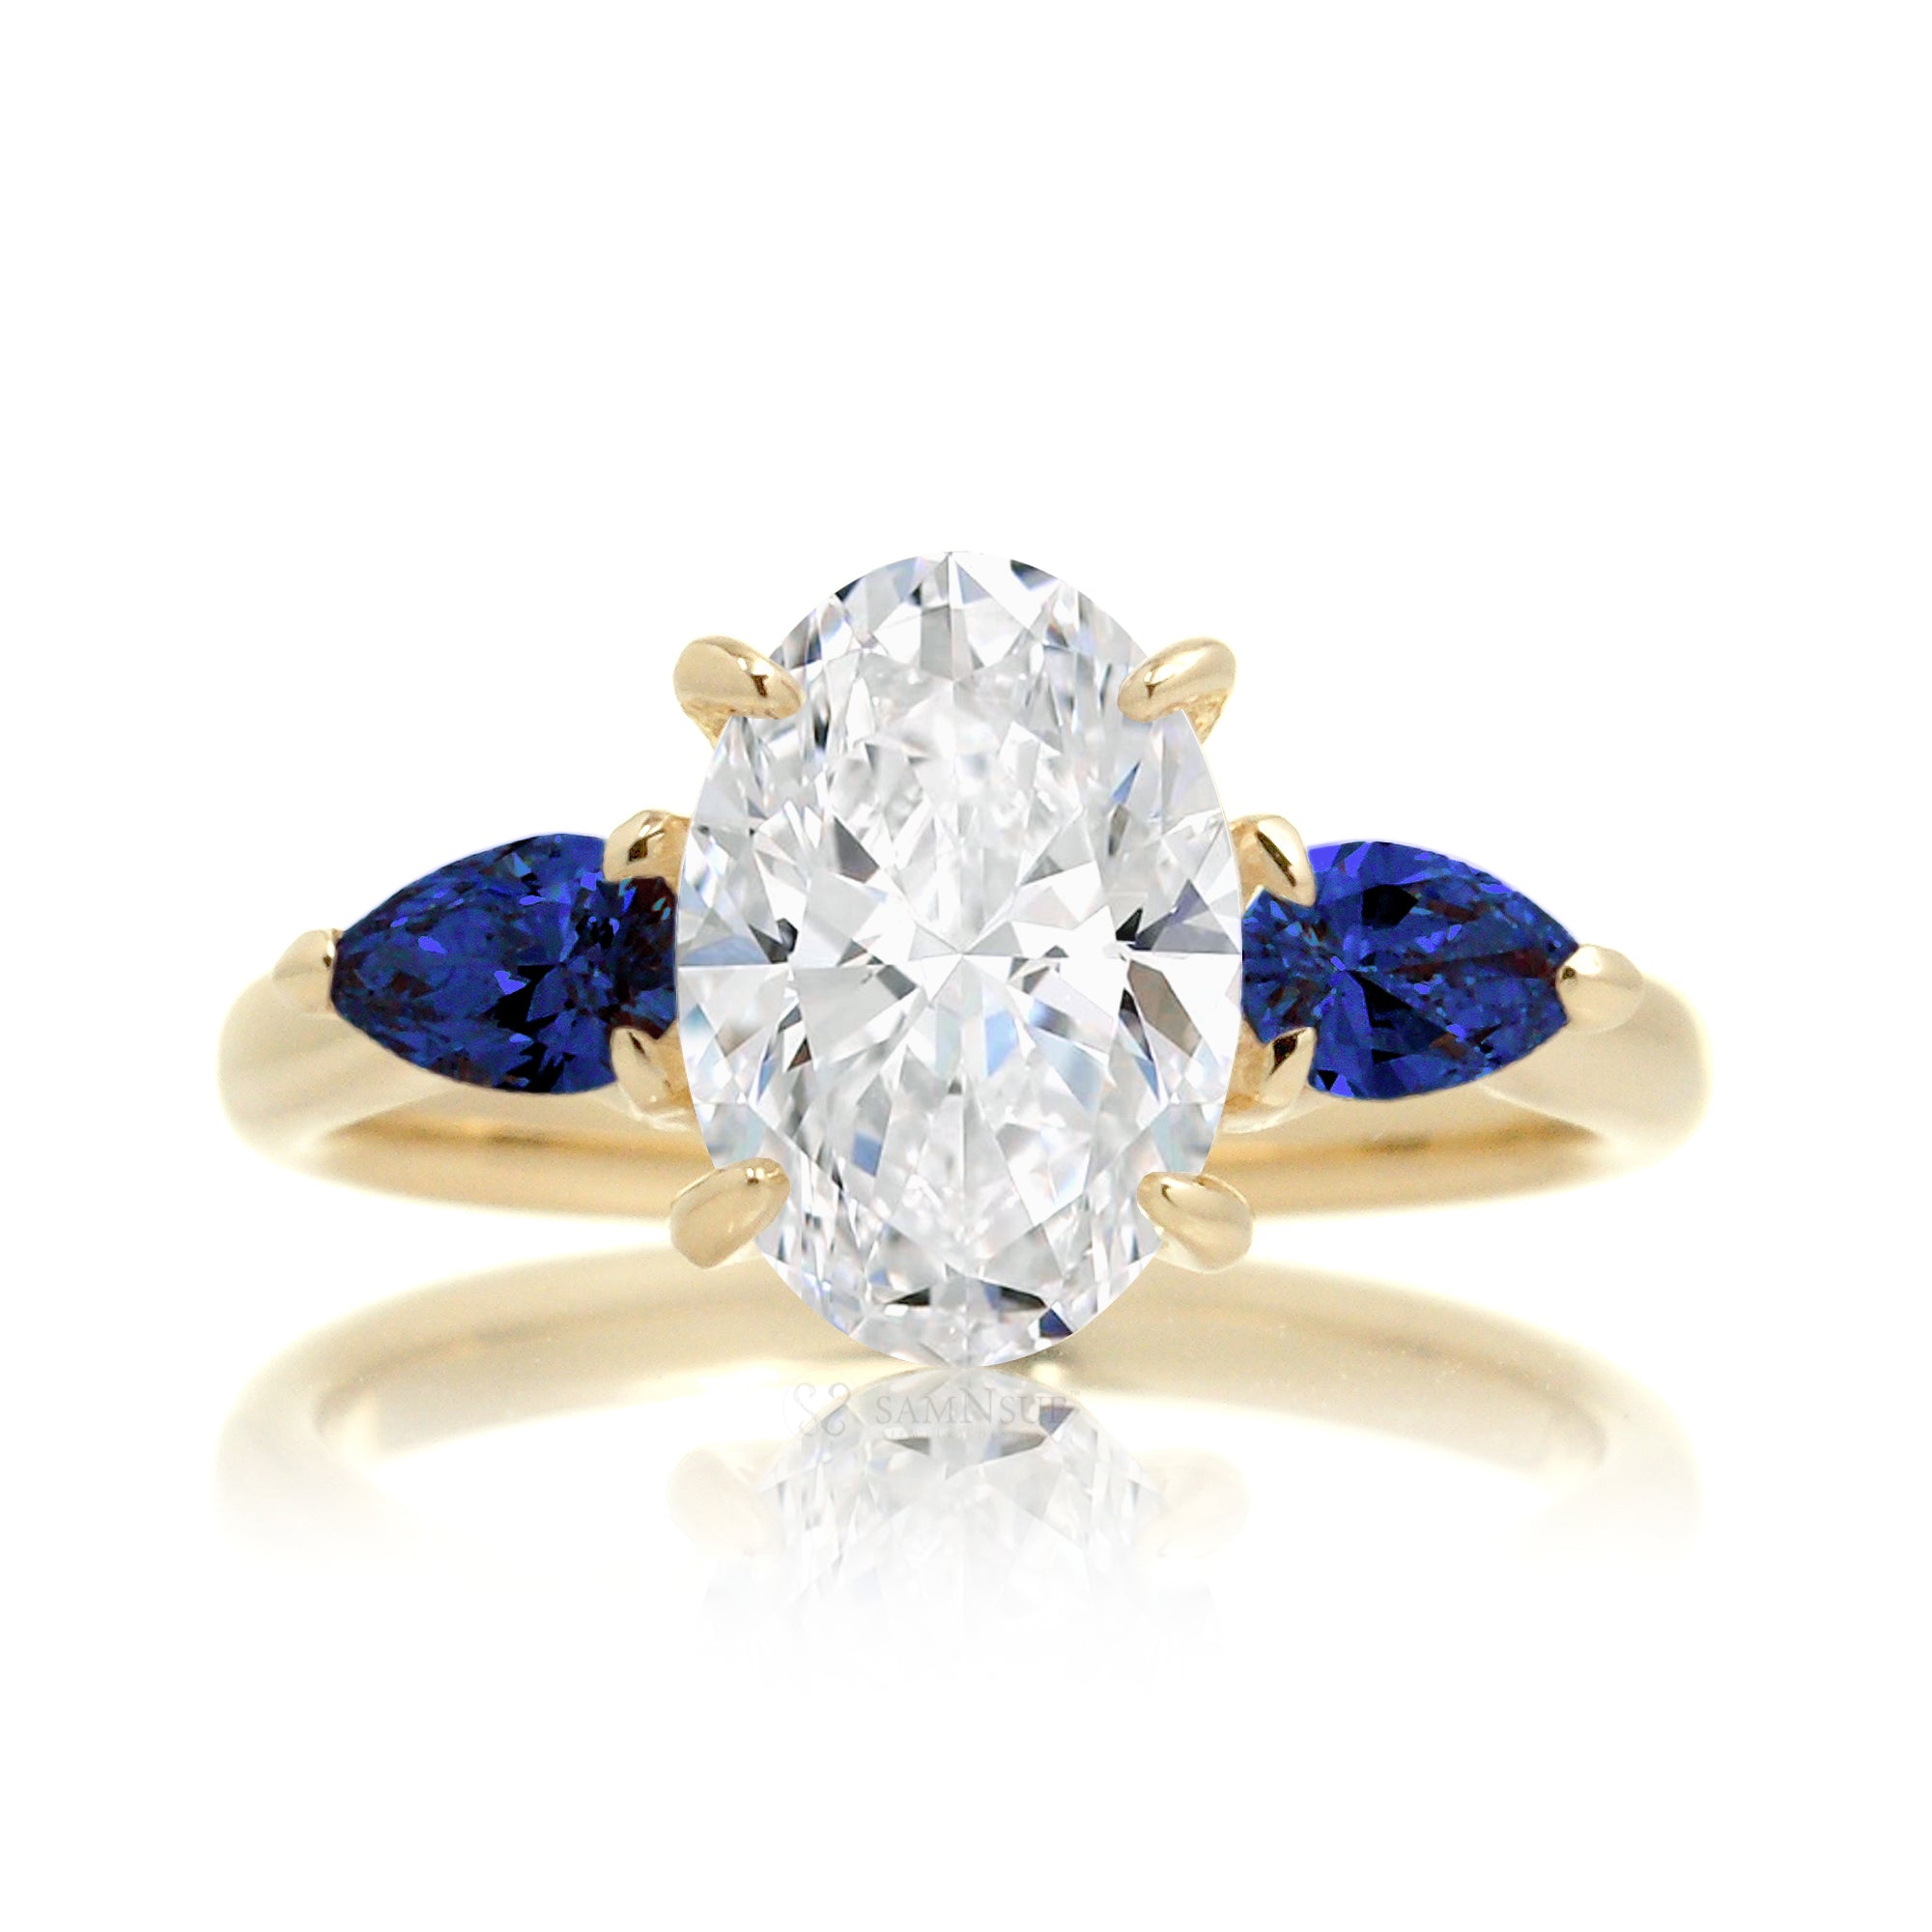 Three-stone pear sapphire and oval cut diamond engagement ring yellow gold